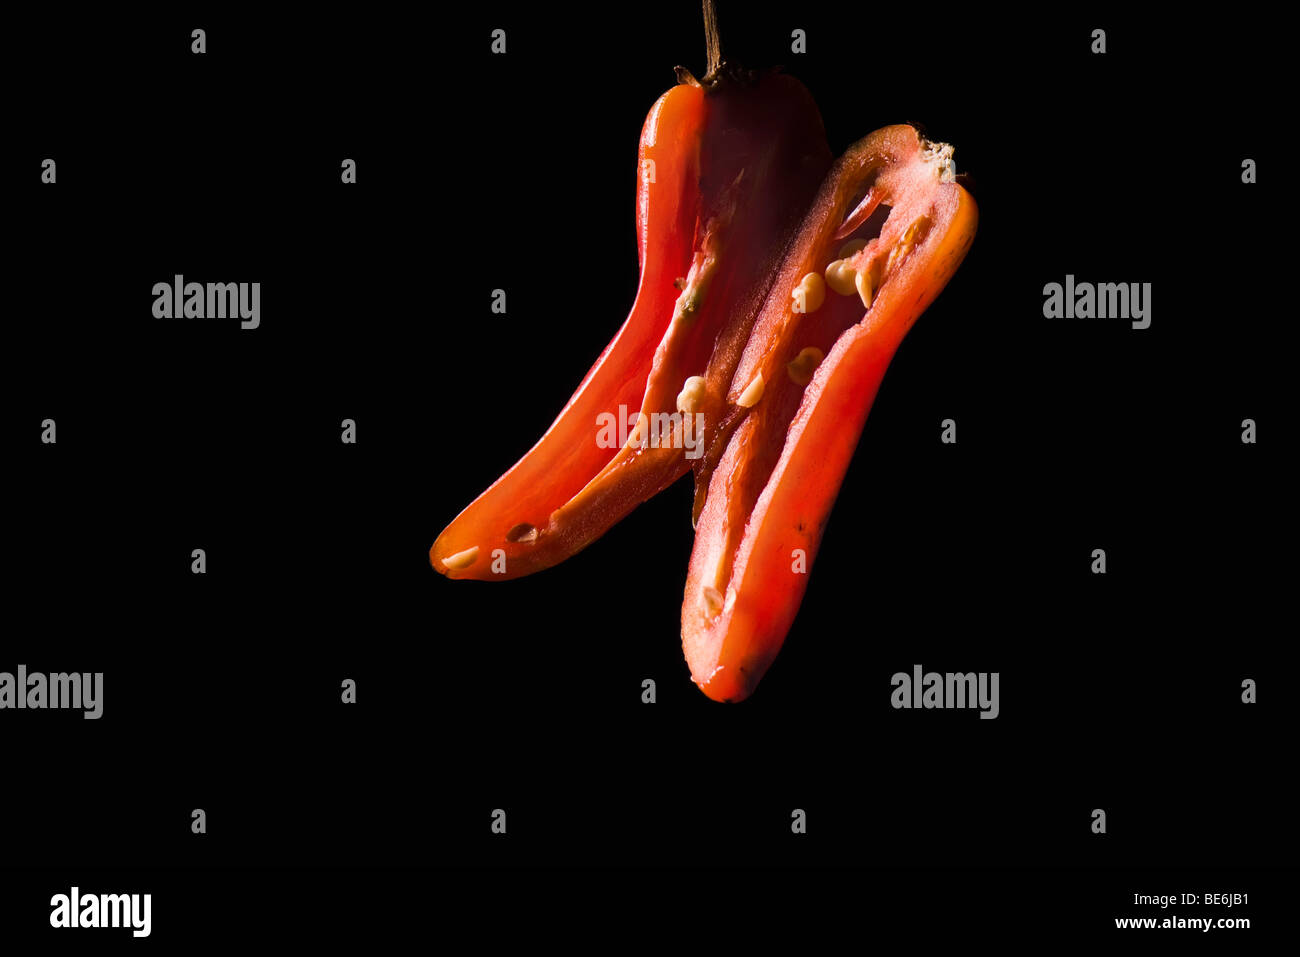 Red chili pepper sliced in half lengthwise, on black background Stock Photo